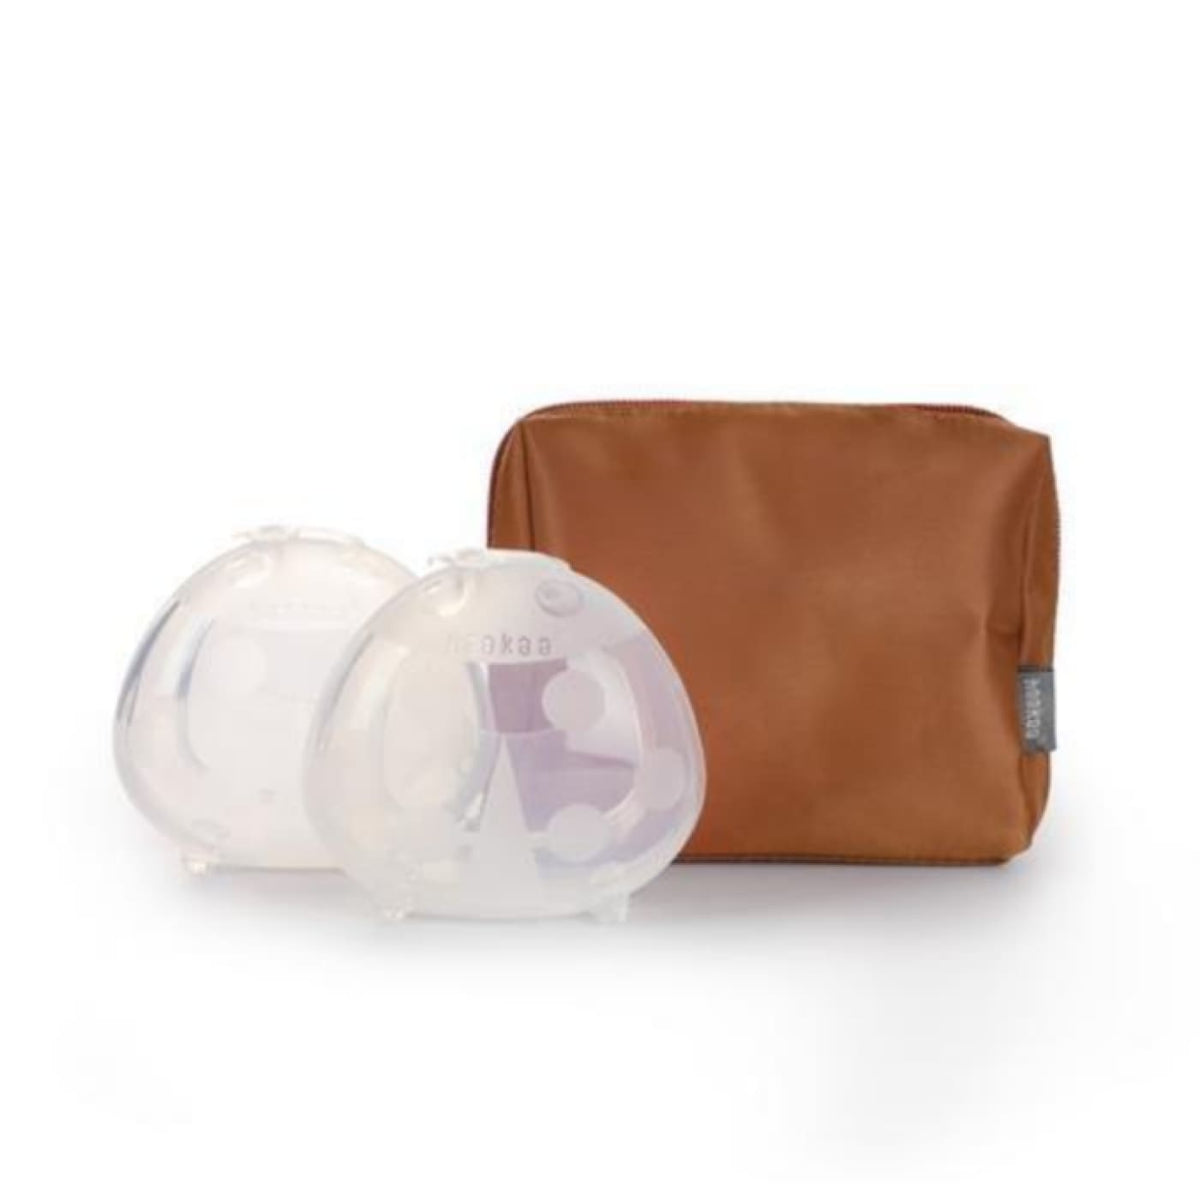 Haakaa Silicone Milk Collector 2pack with Free Gift - Camel - Camel - NURSING &amp; FEEDING - BREAST PUMPS/ACCESSORIES